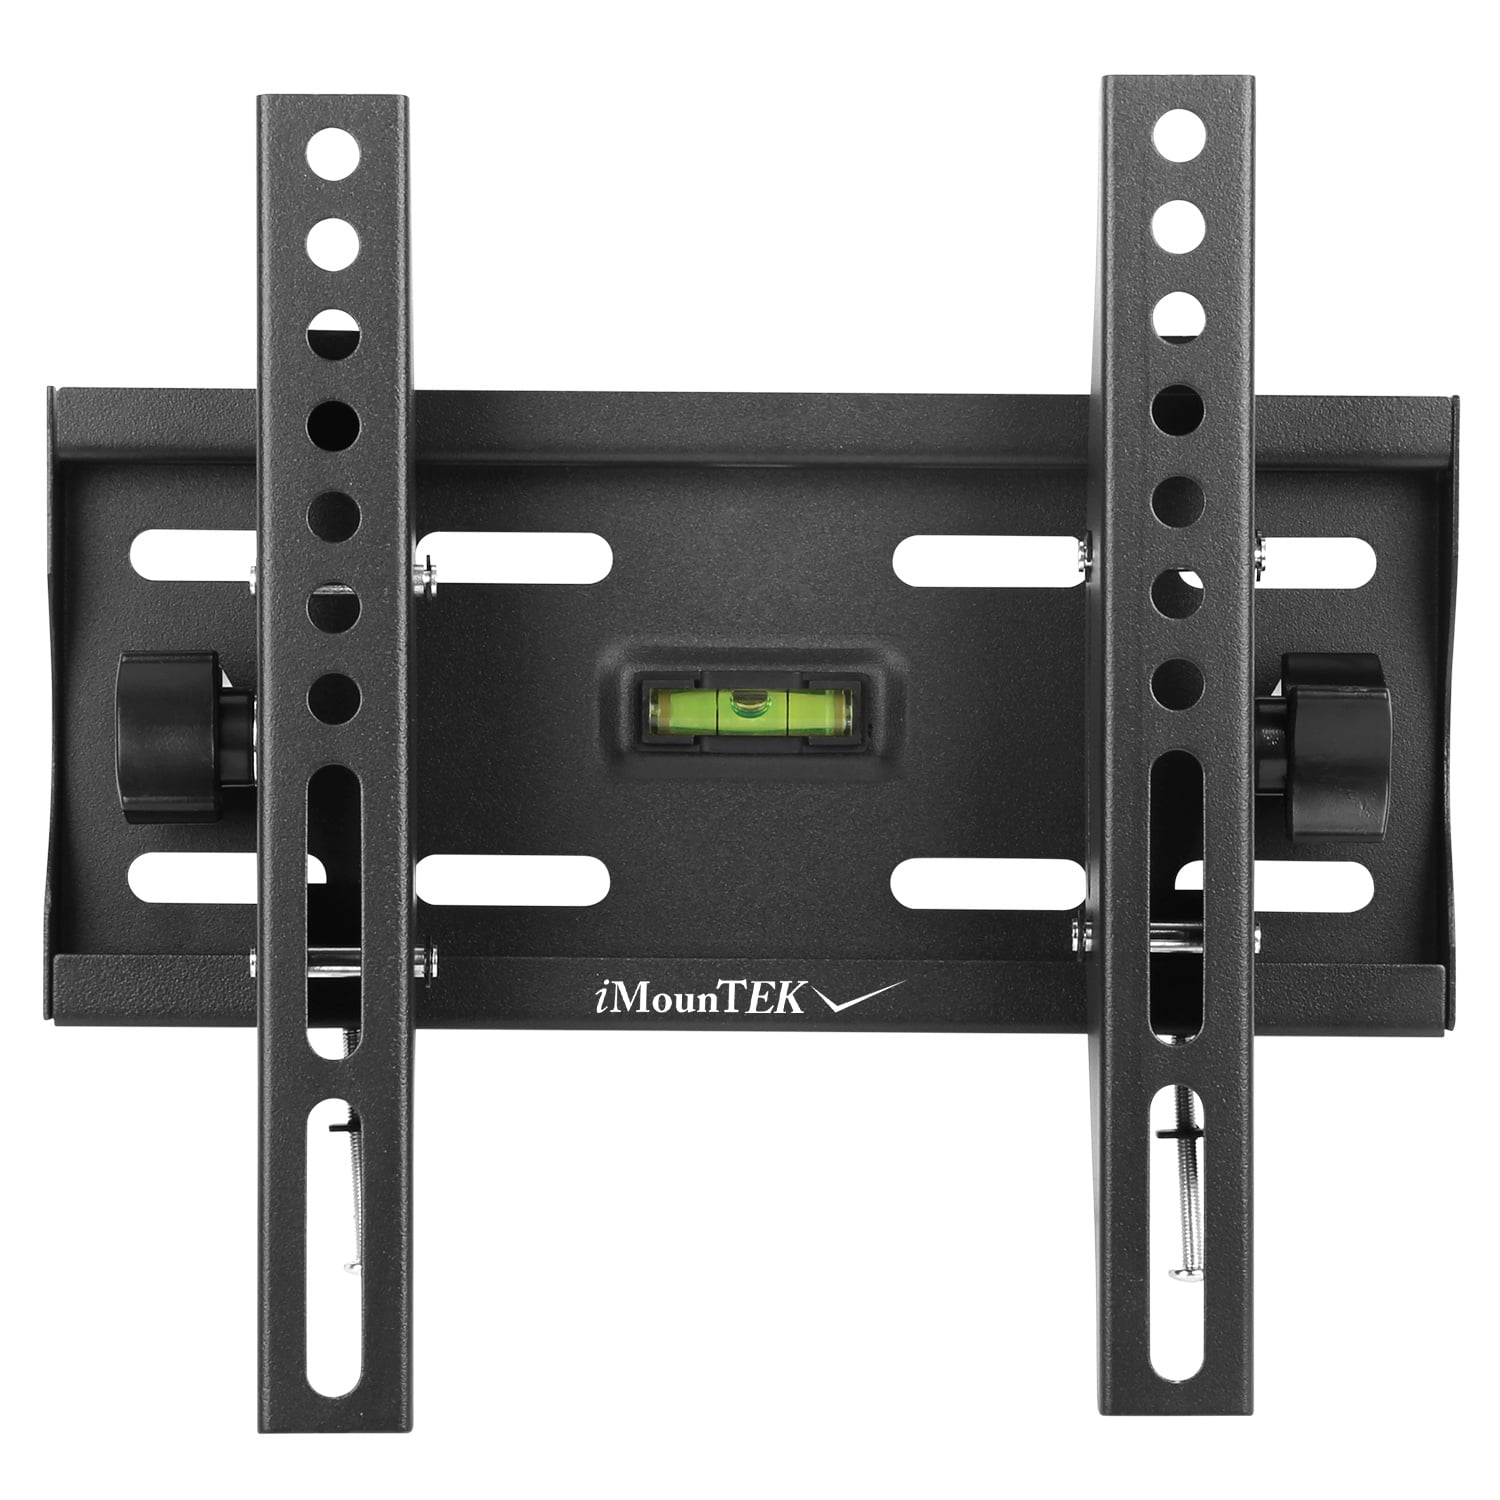 LCD LED FLAT TV Wall Mount Bracket Fixed Wall Mount For 23 25 27 32 40 42' TVs 